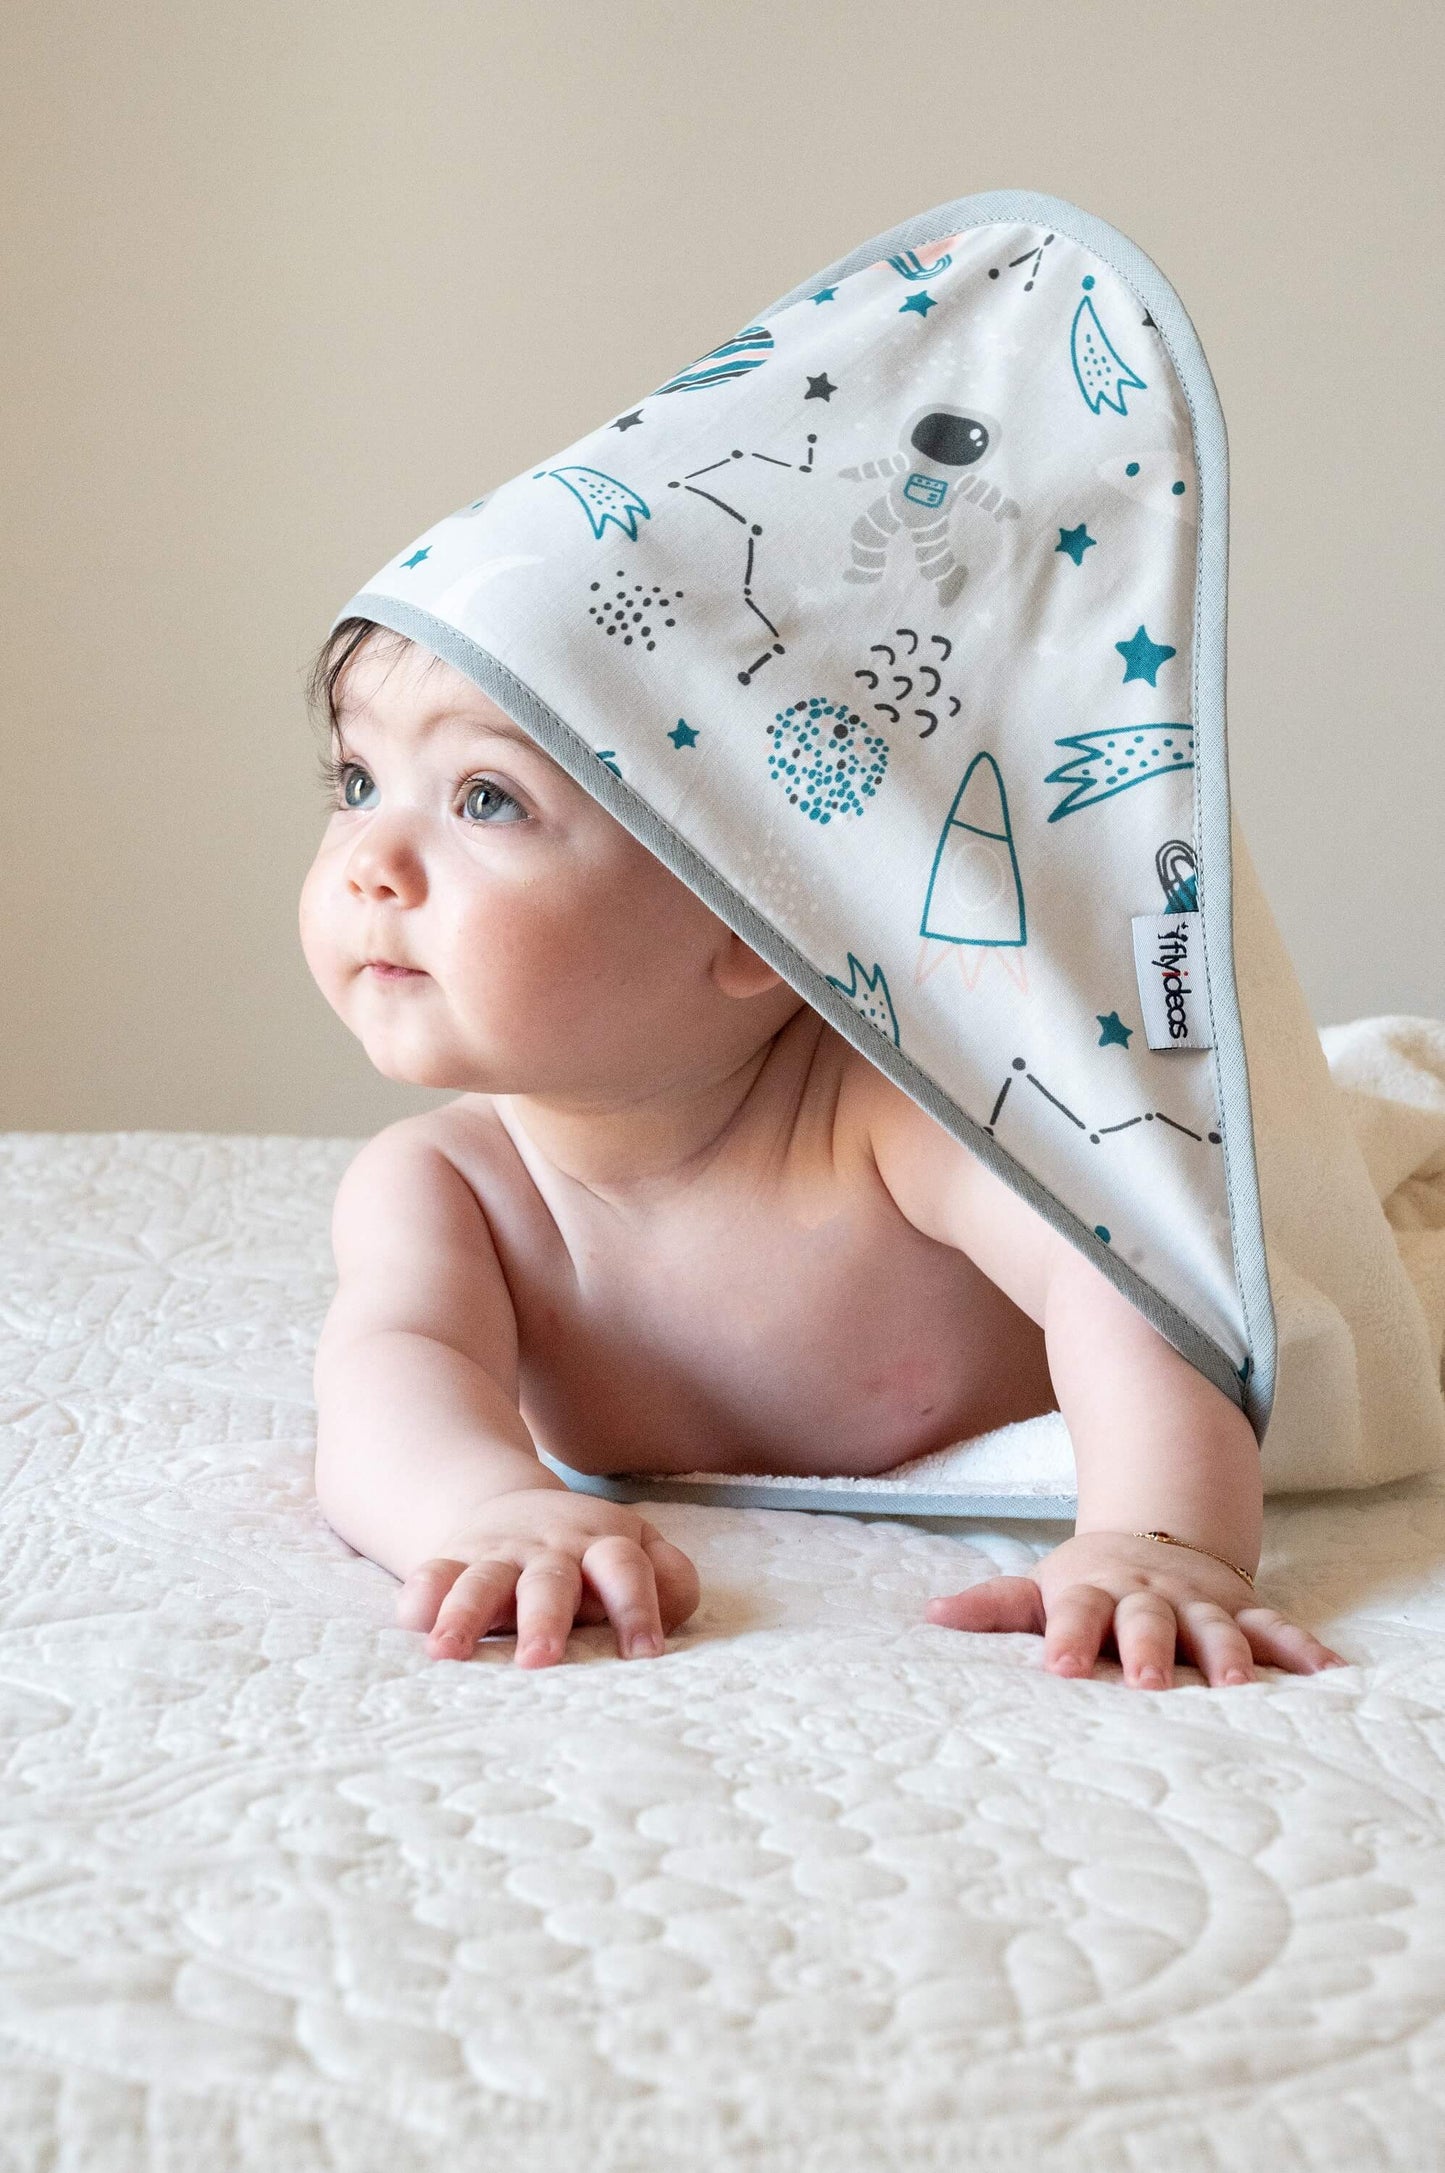 FlyIdeas Hooded Baby Towel for Newborns - Bamboo & Cotton, 70x70 cm